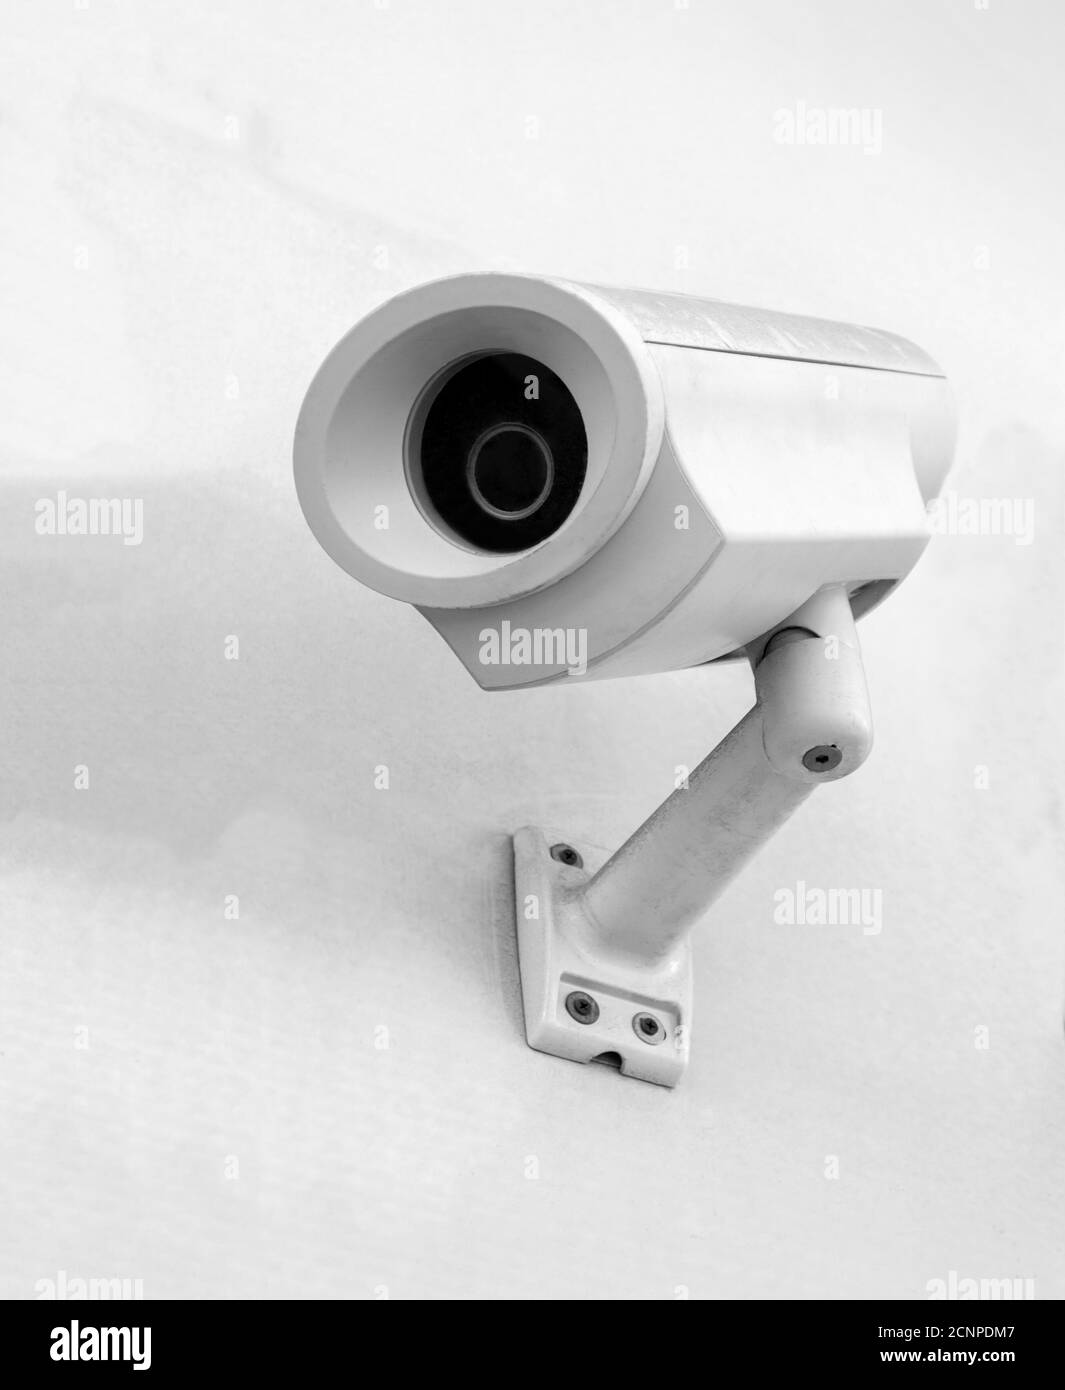 Security camera Black and White Stock Photos & Images - Alamy